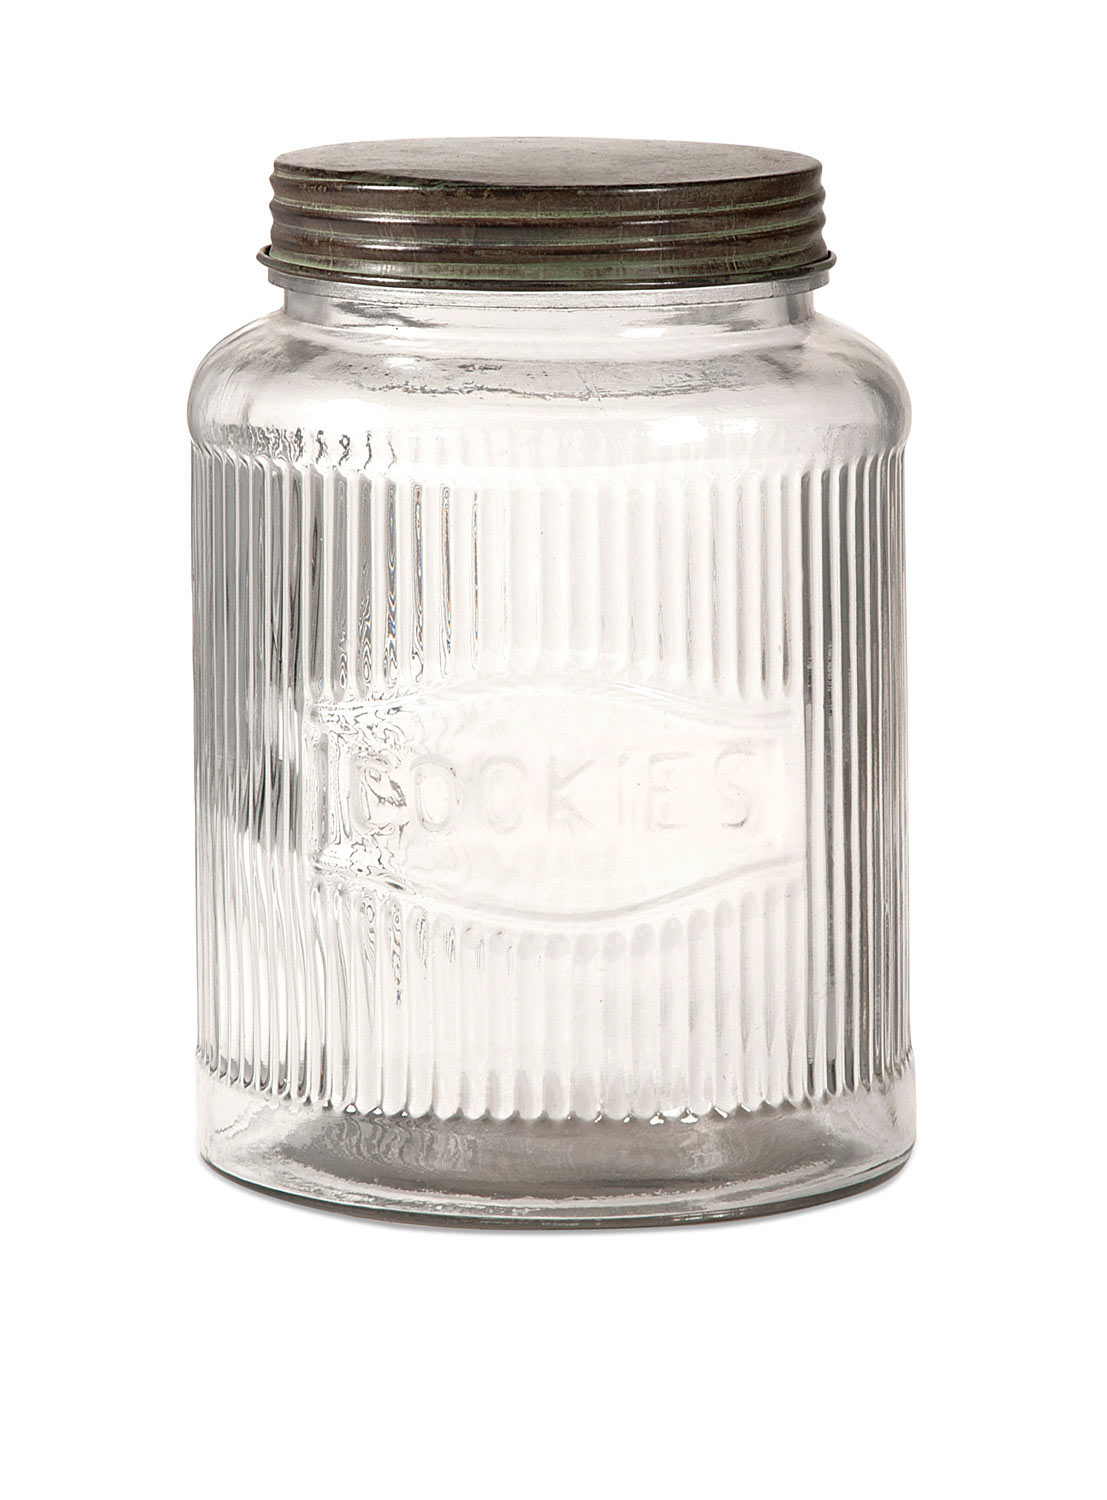 IMAX Dyer Glass Cookie Jar with Lid